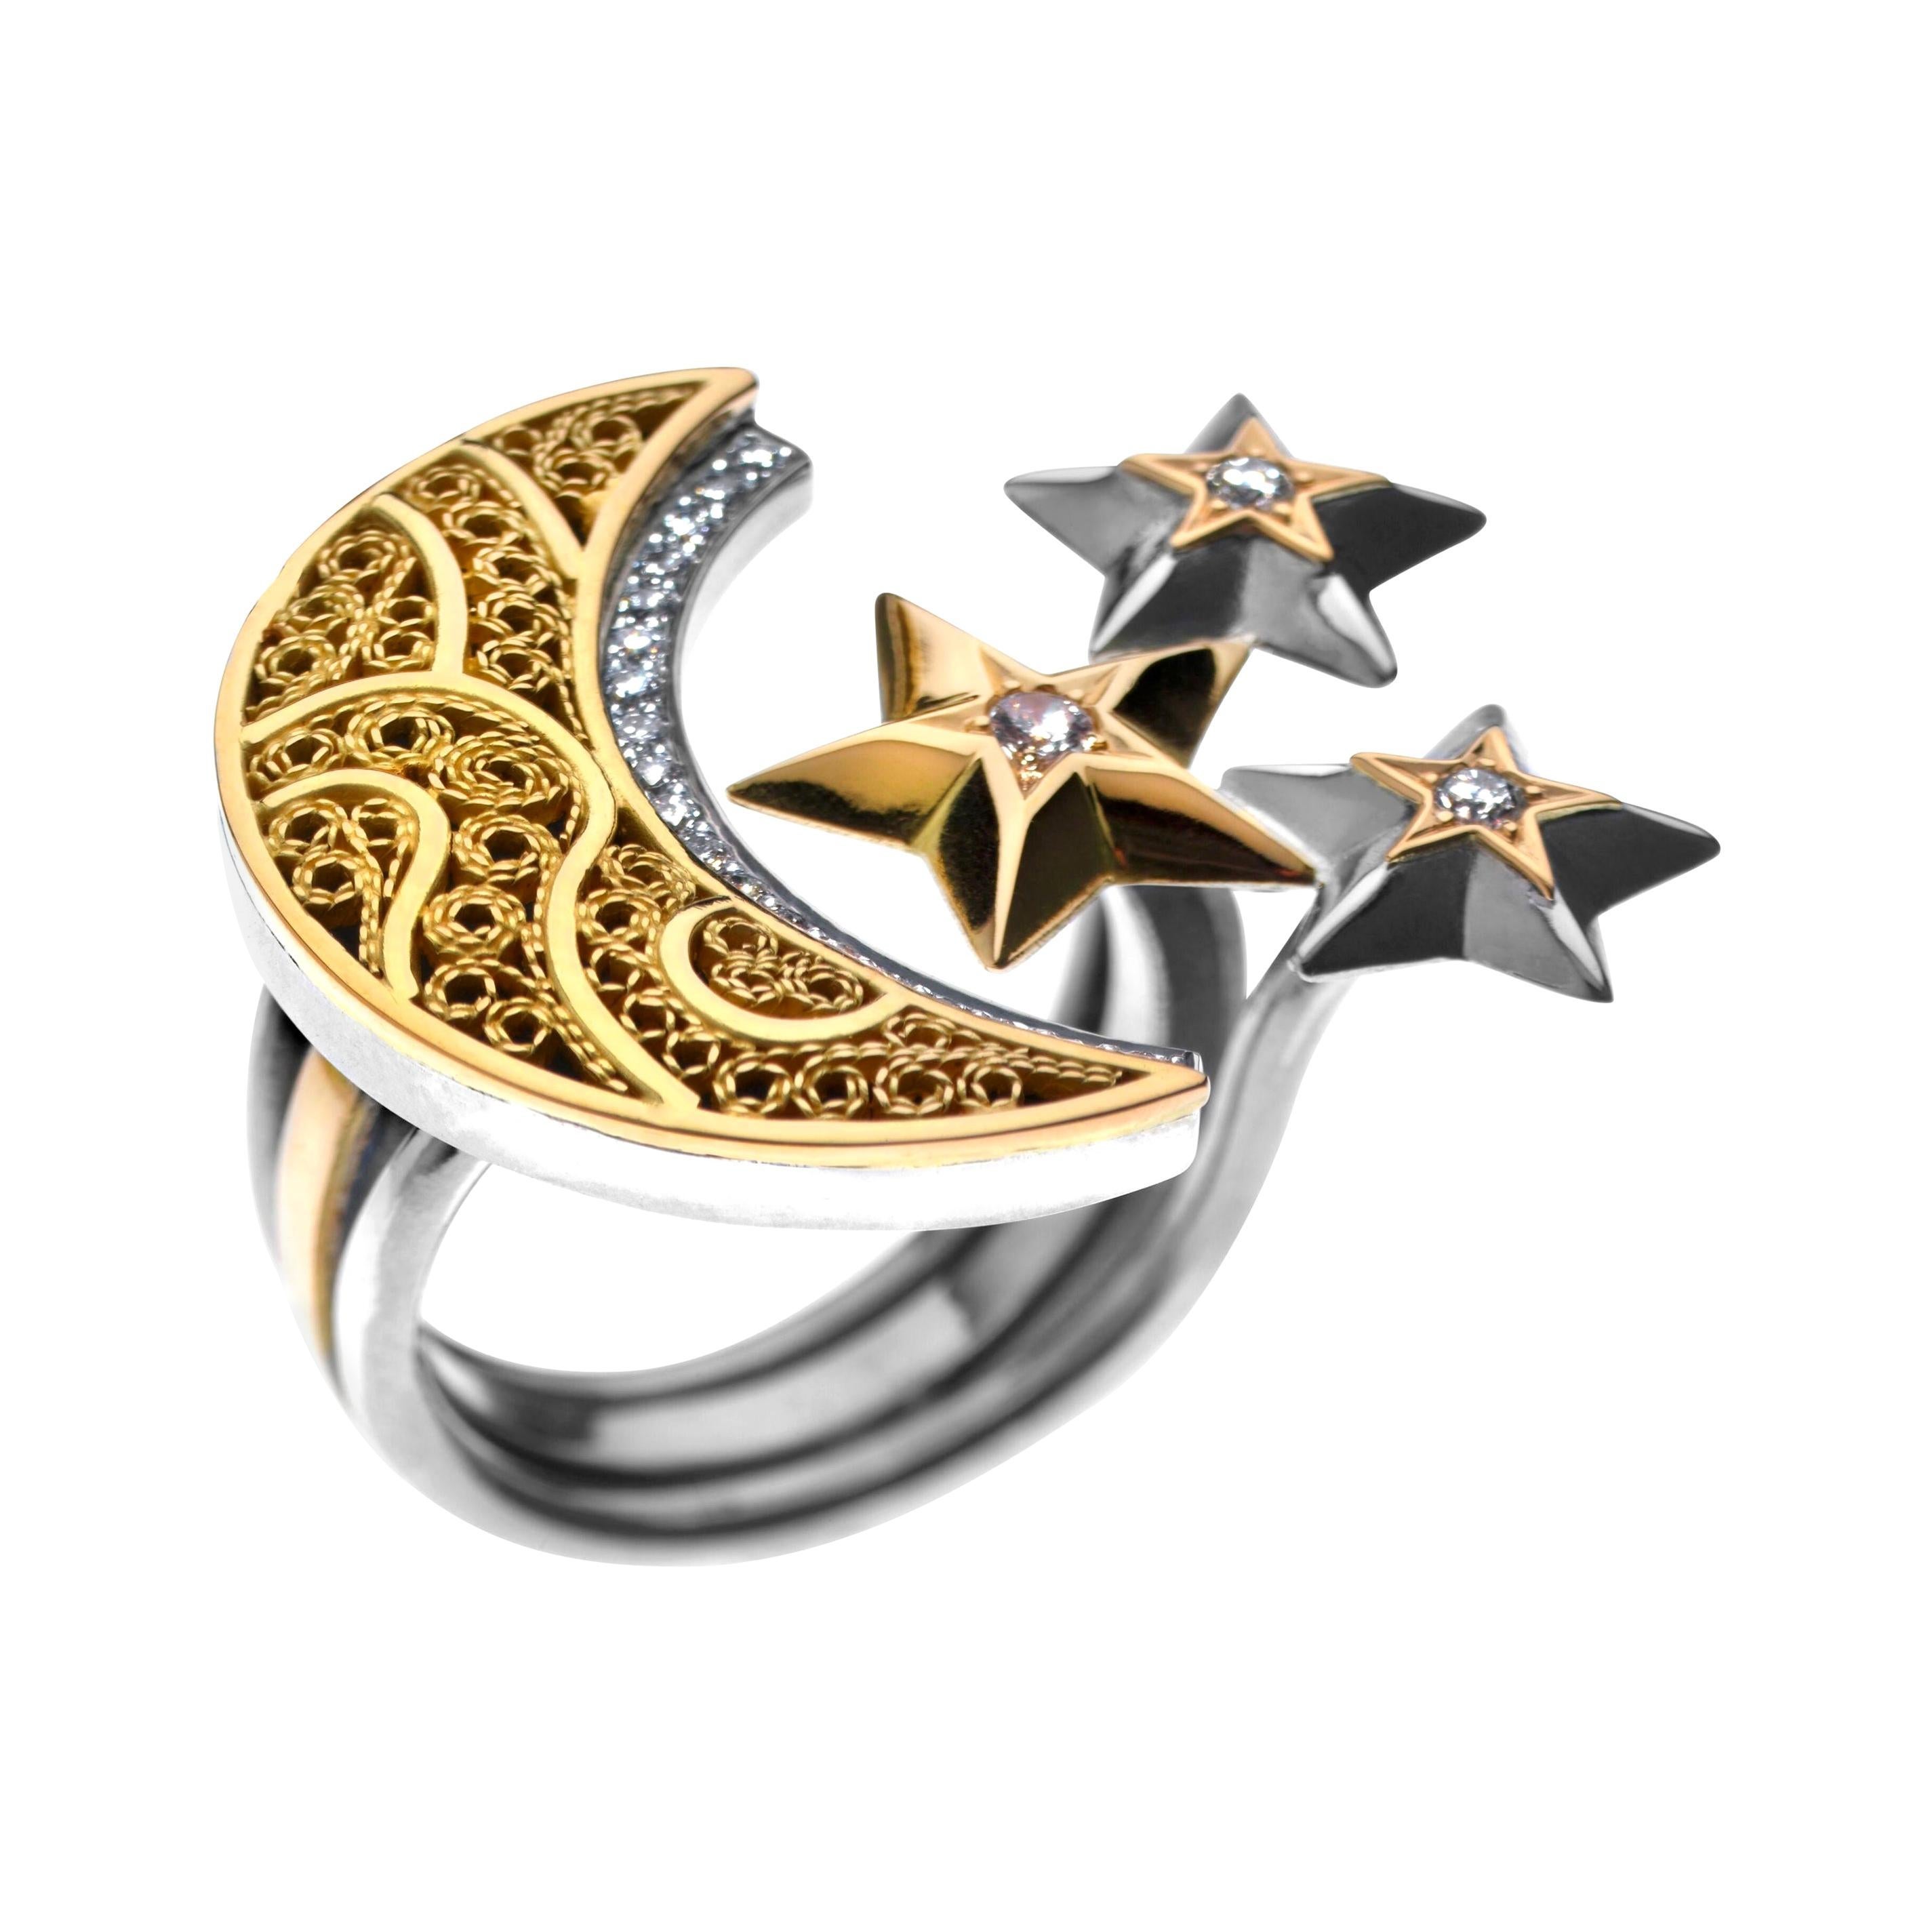 18 Karat Gold, Sterling Silver and Diamond Filigree Crescent Moon and Stars Ring